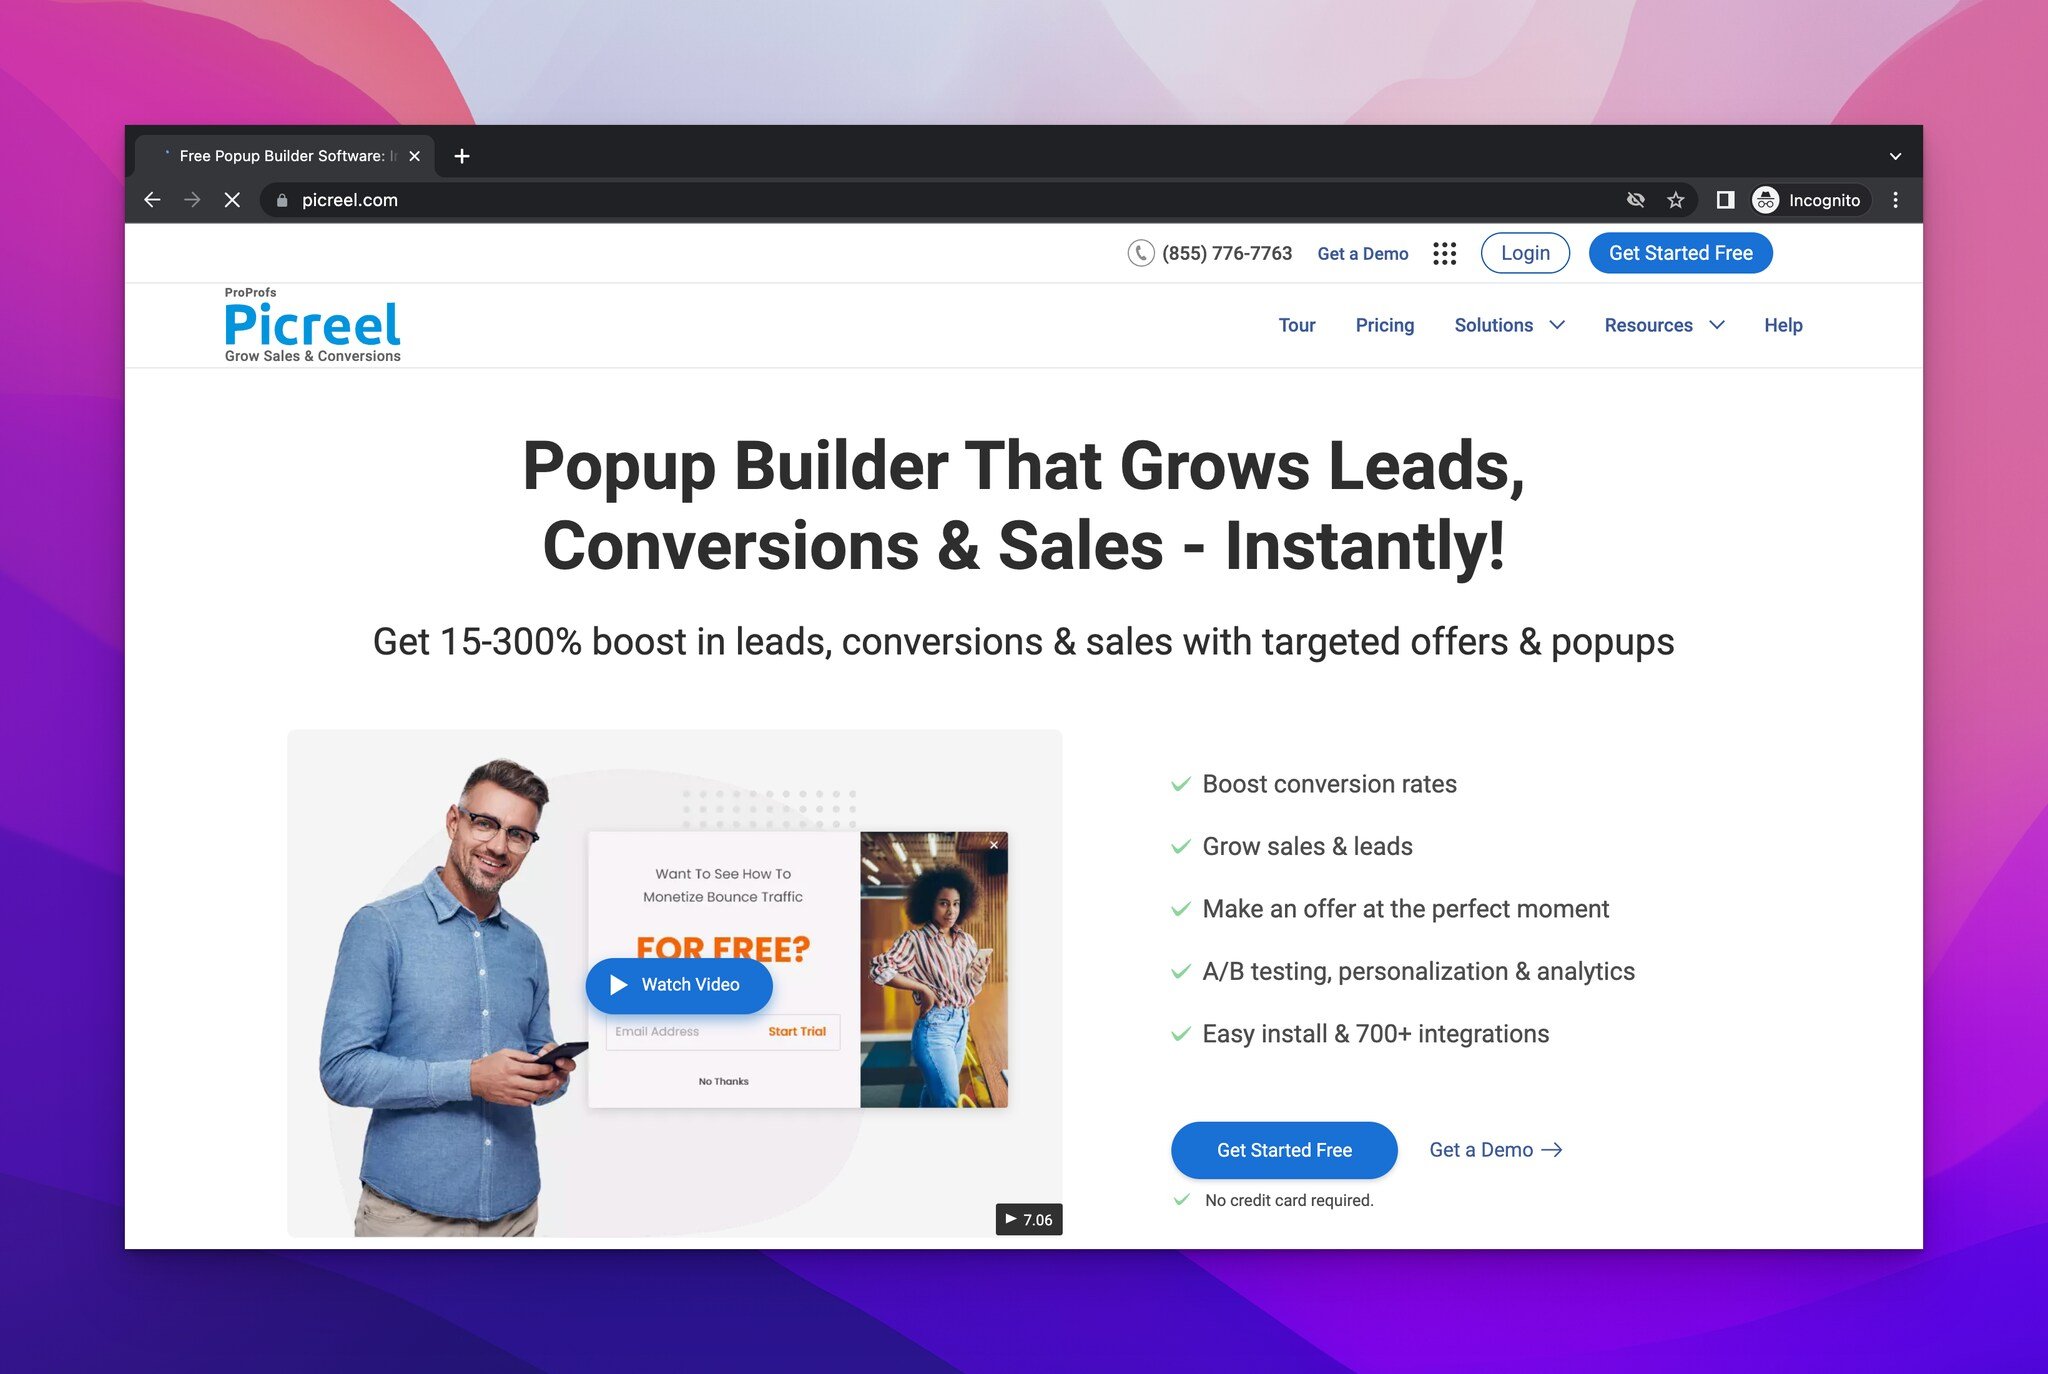 Picreel’s homepage with the headline in the center followed by a video preview with a man holding a mobile phone next to a popup and product features listed on the right.